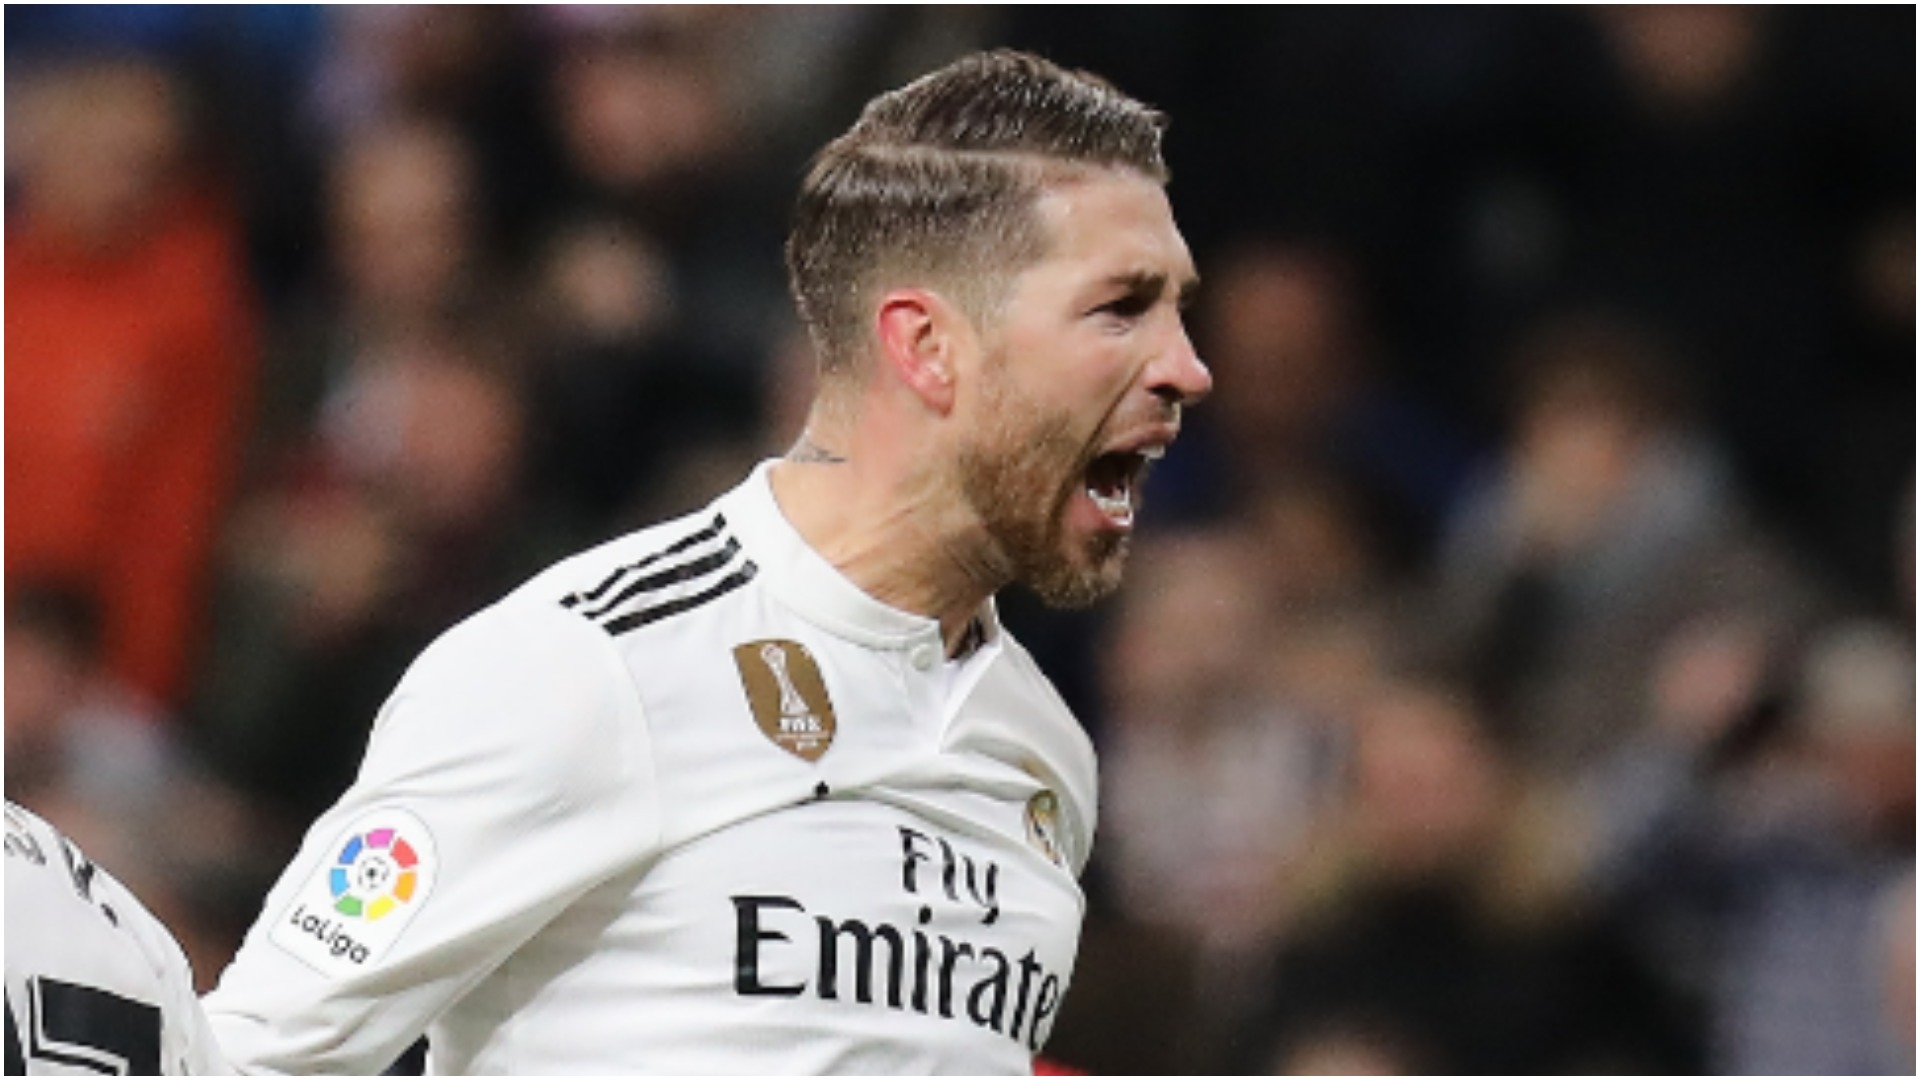 UEFA is investigating Sergio Ramos' comments about his yellow card, but the Real Madrid captain is shocked by the uproar.